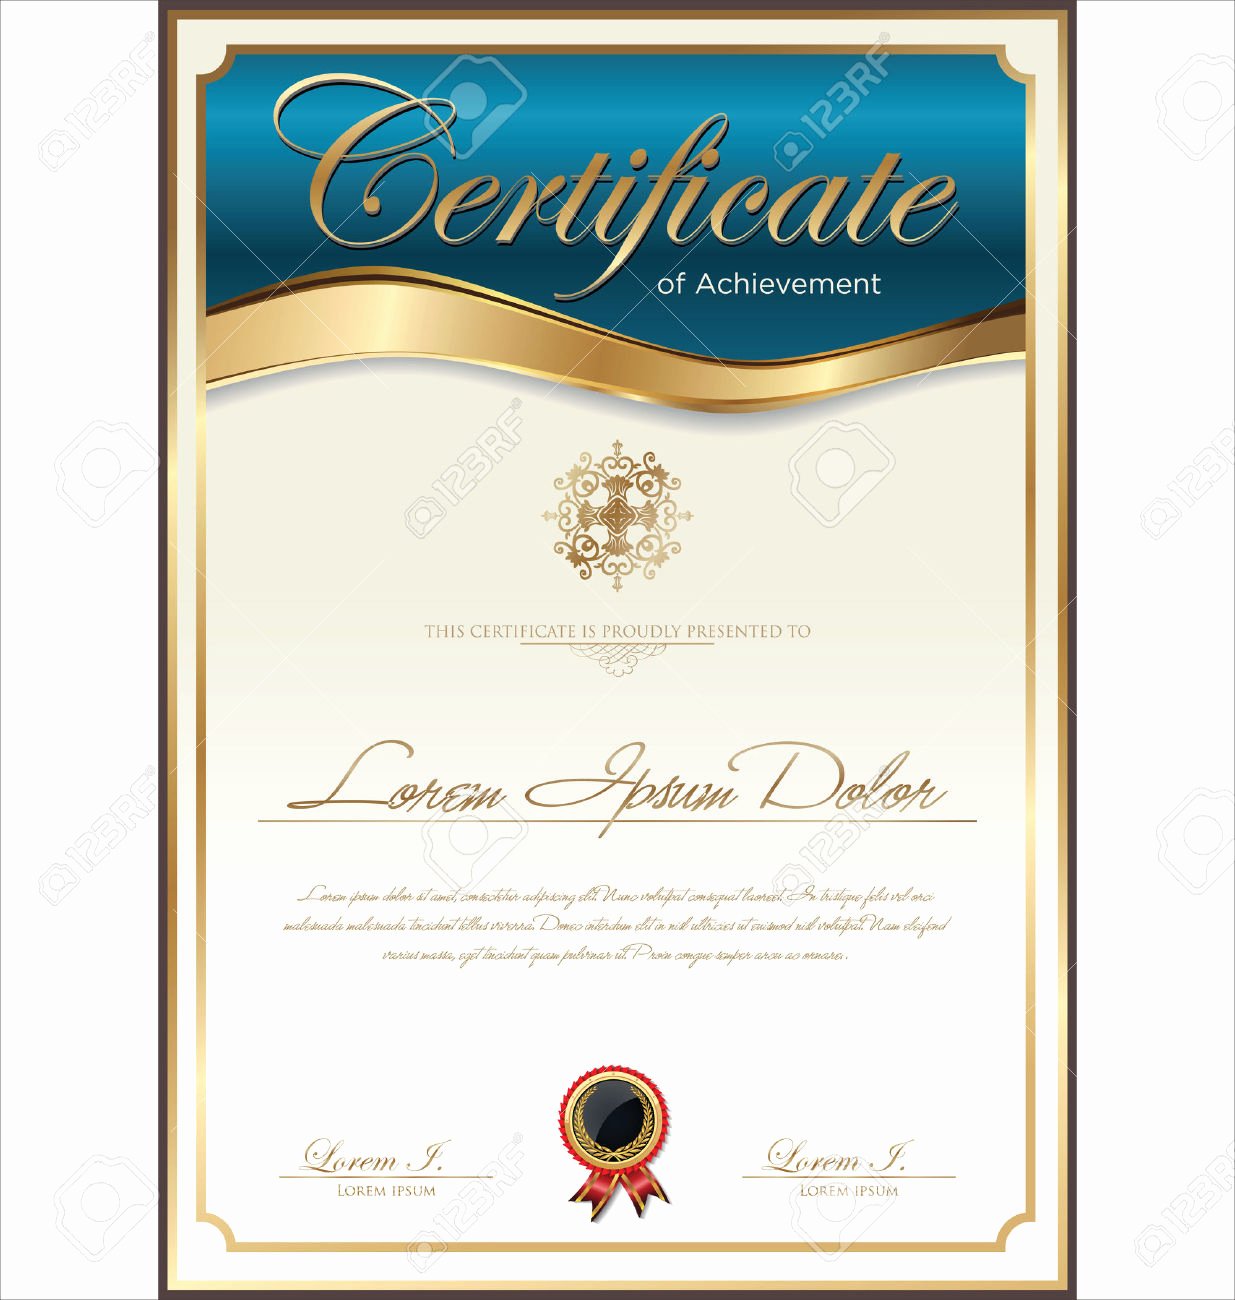 Certificate Templates Fotolip Rich Image and Wallpaper